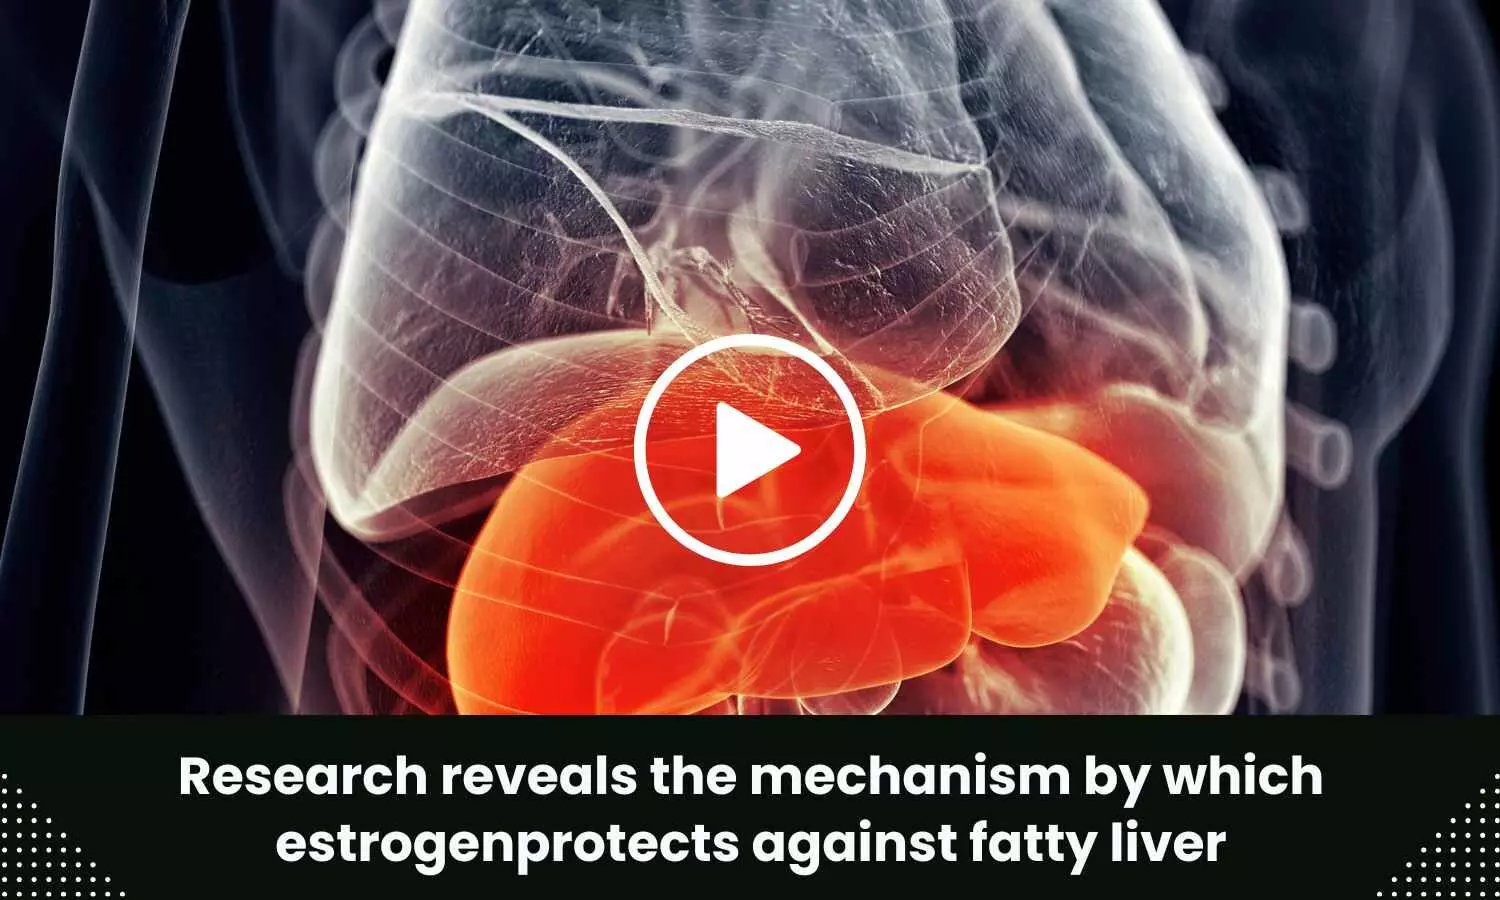 Research reveals the mechanism by which estrogen protects against fatty liver